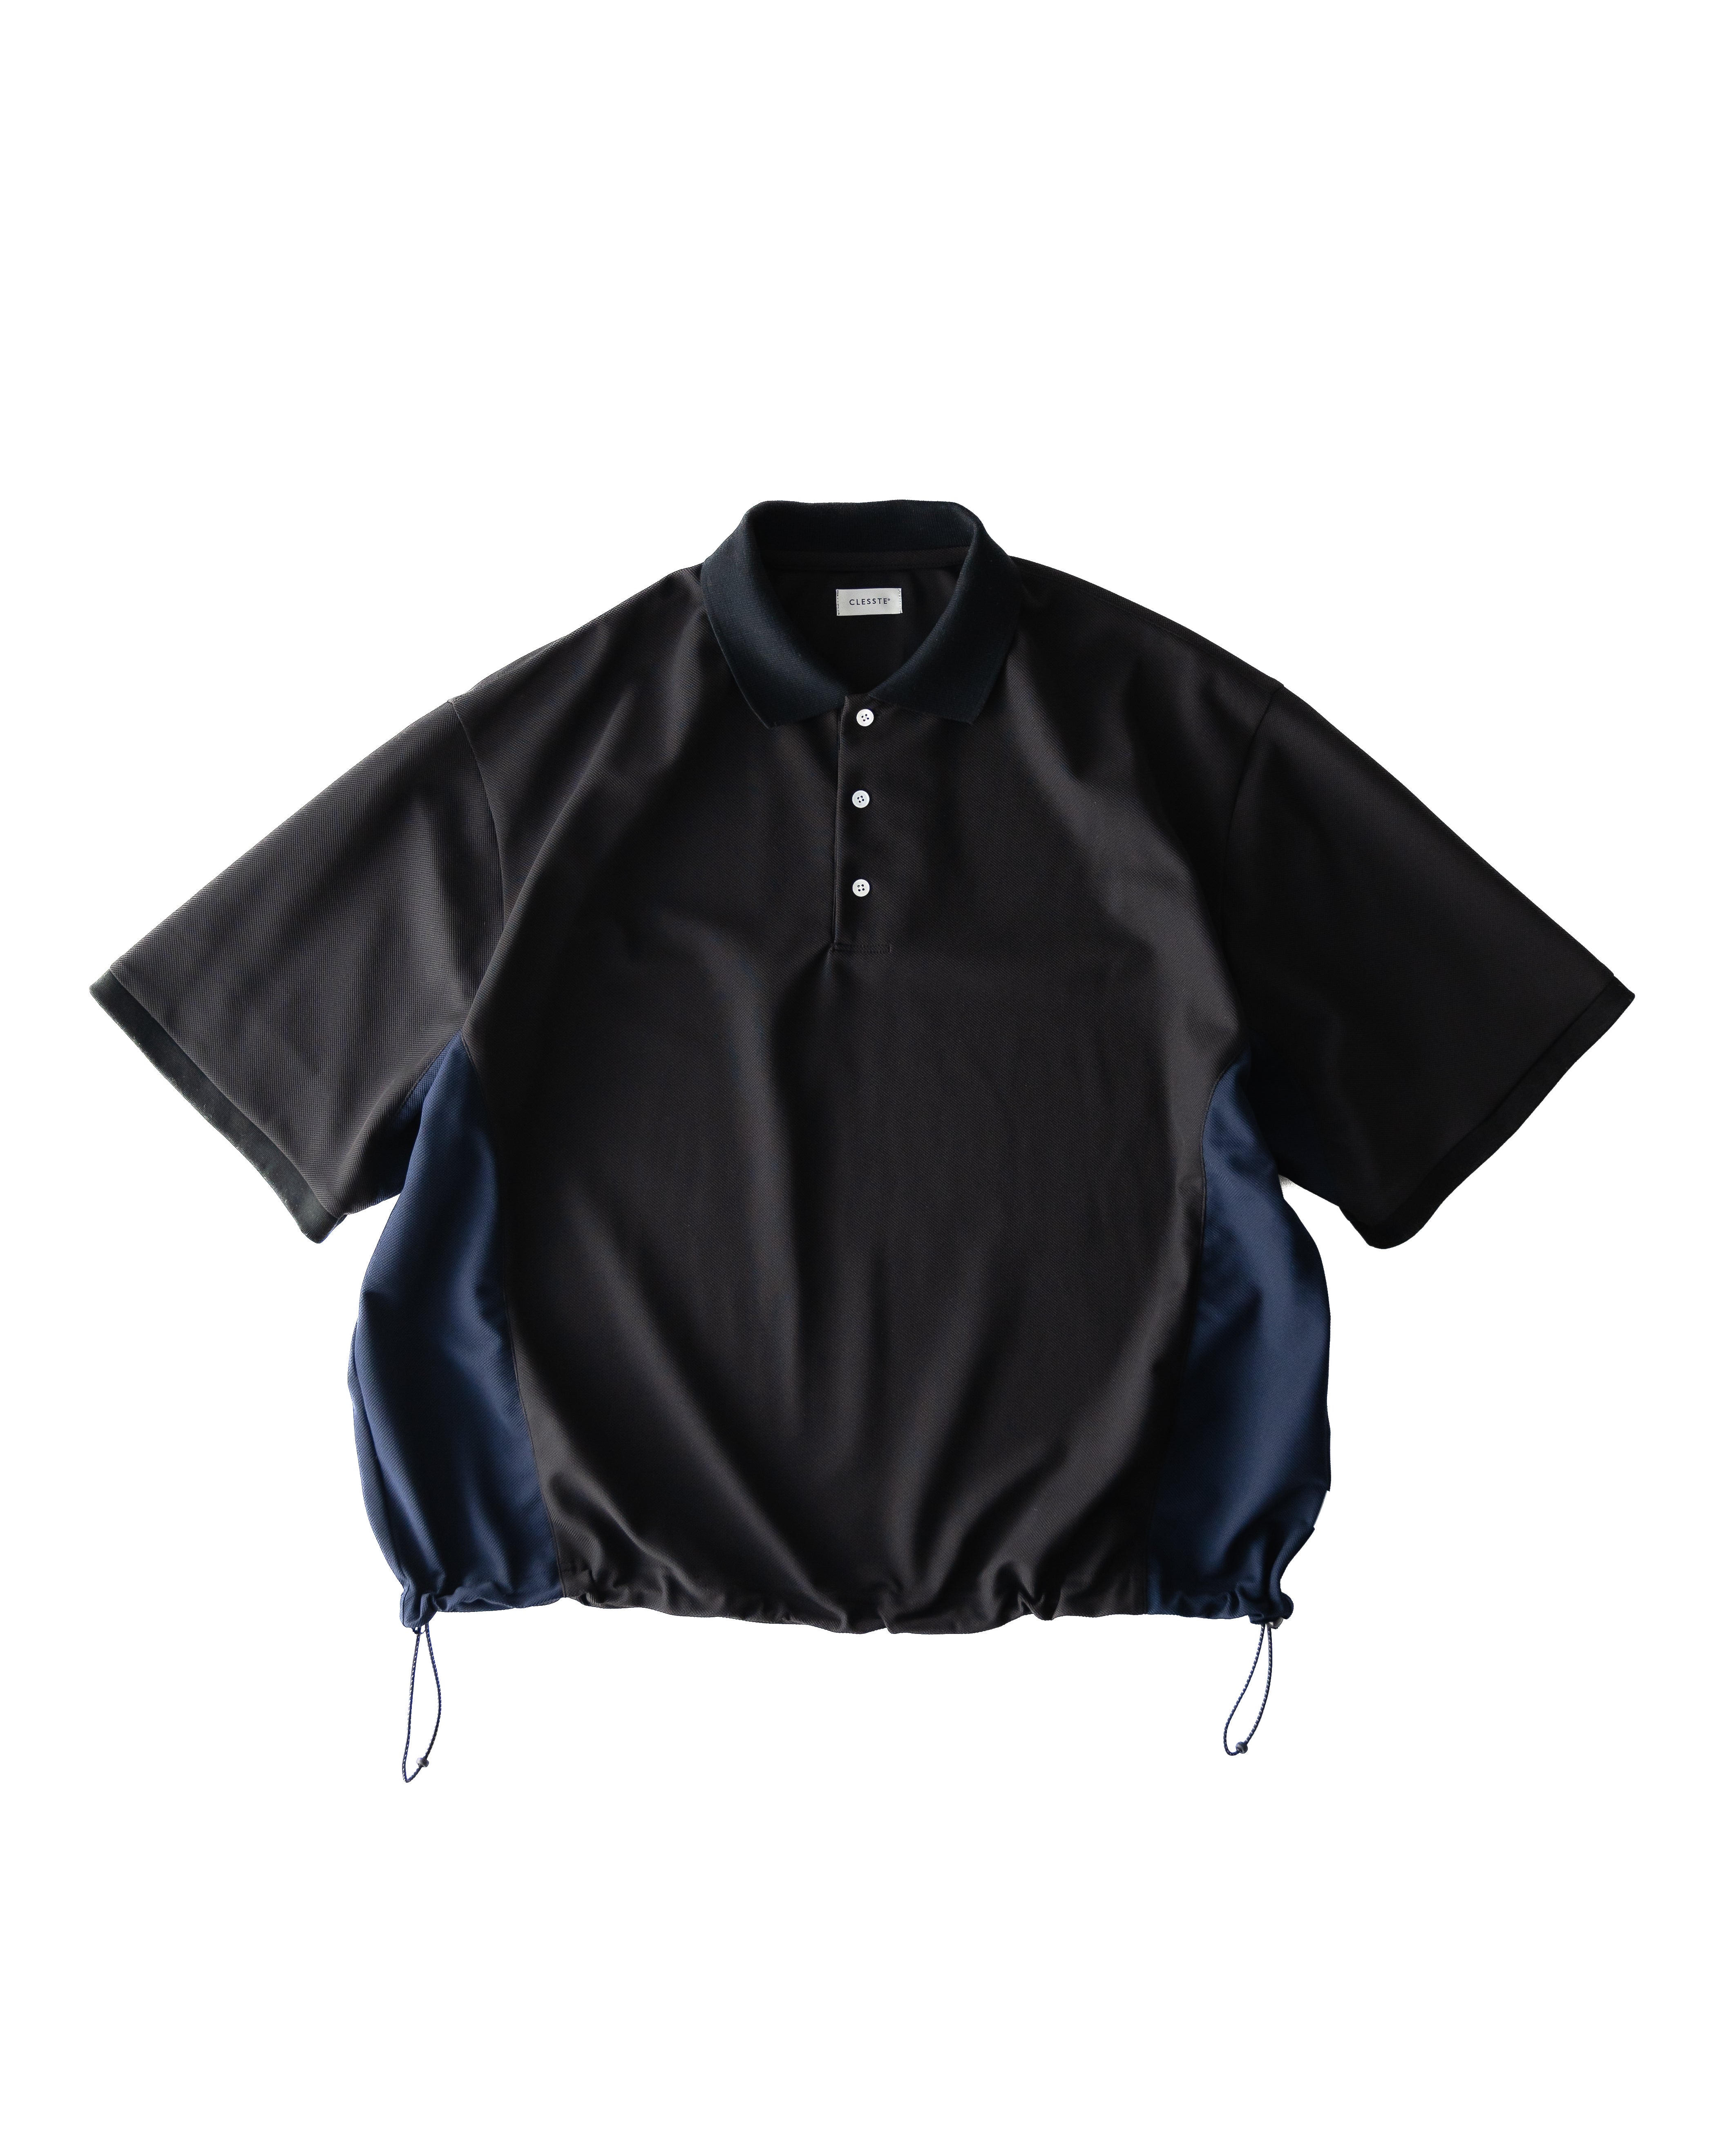 【5.18 SAT 20:00- IN STOCK】ACTIVE CITY S/S POLO SHIRT